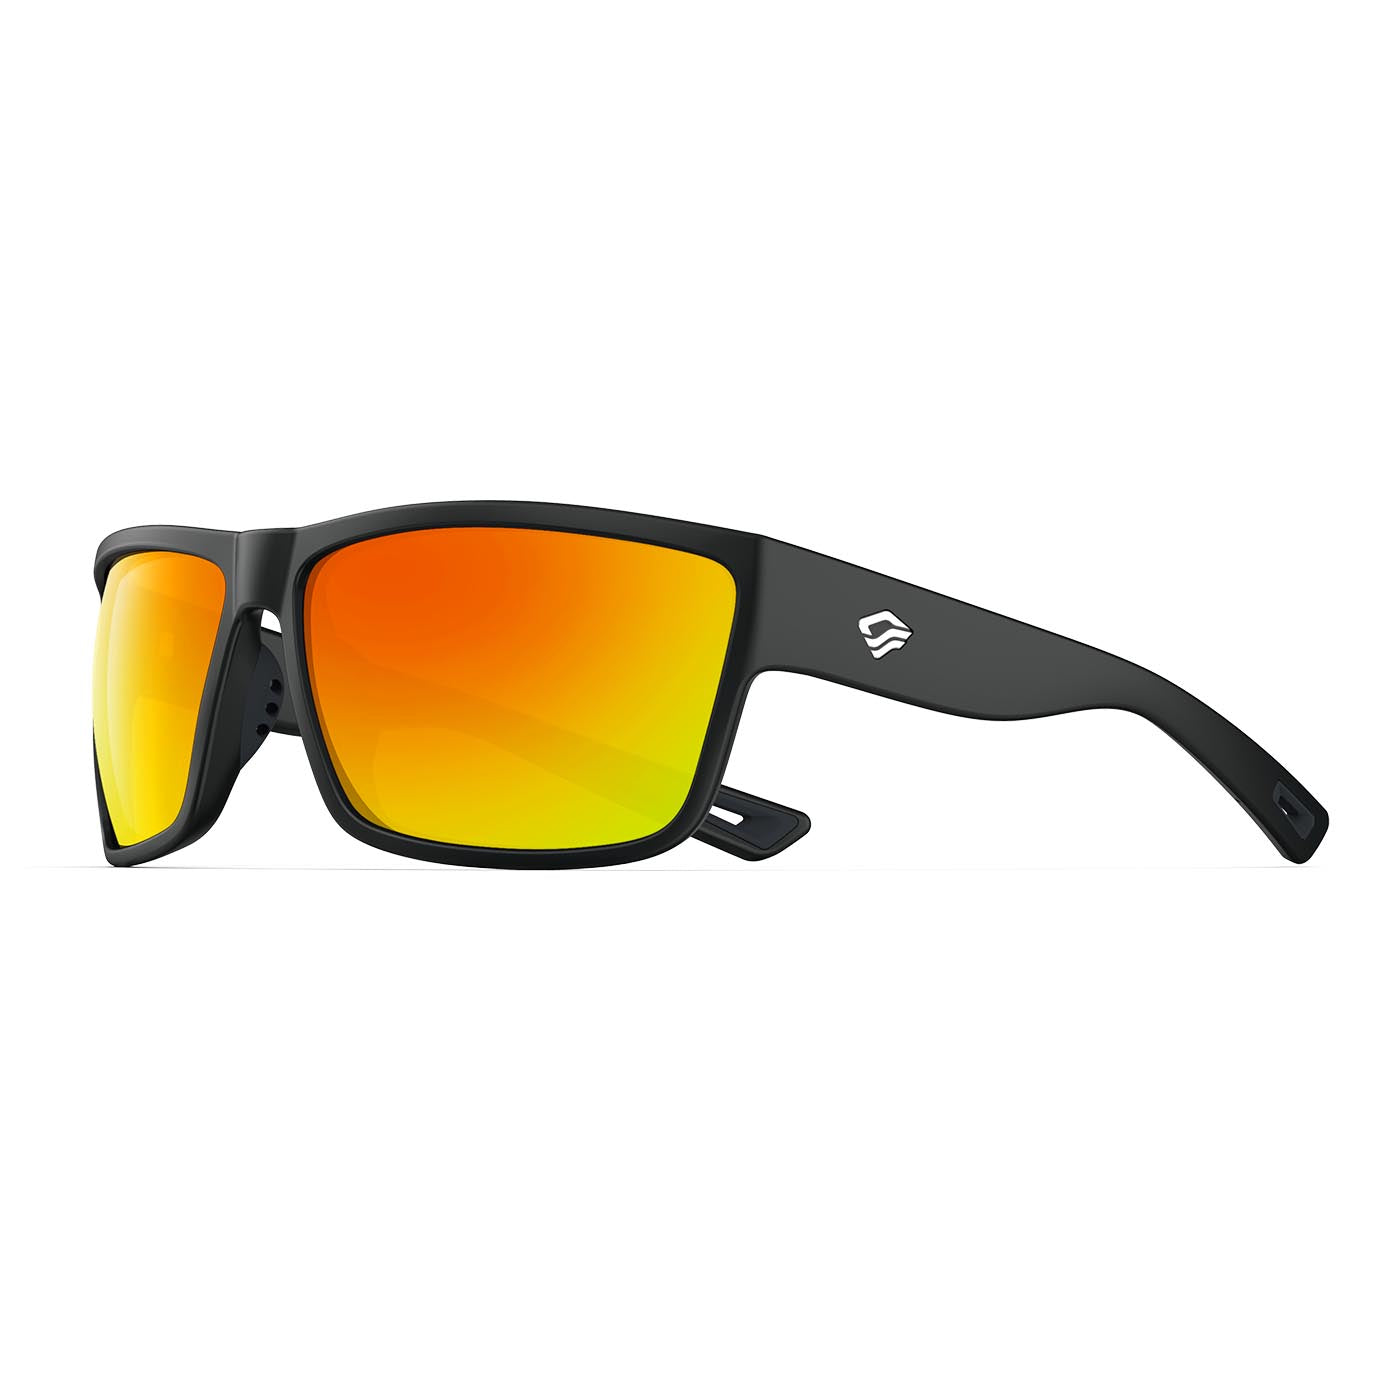 Buy clearance polarized sunglasses Online in KUWAIT at Low Prices